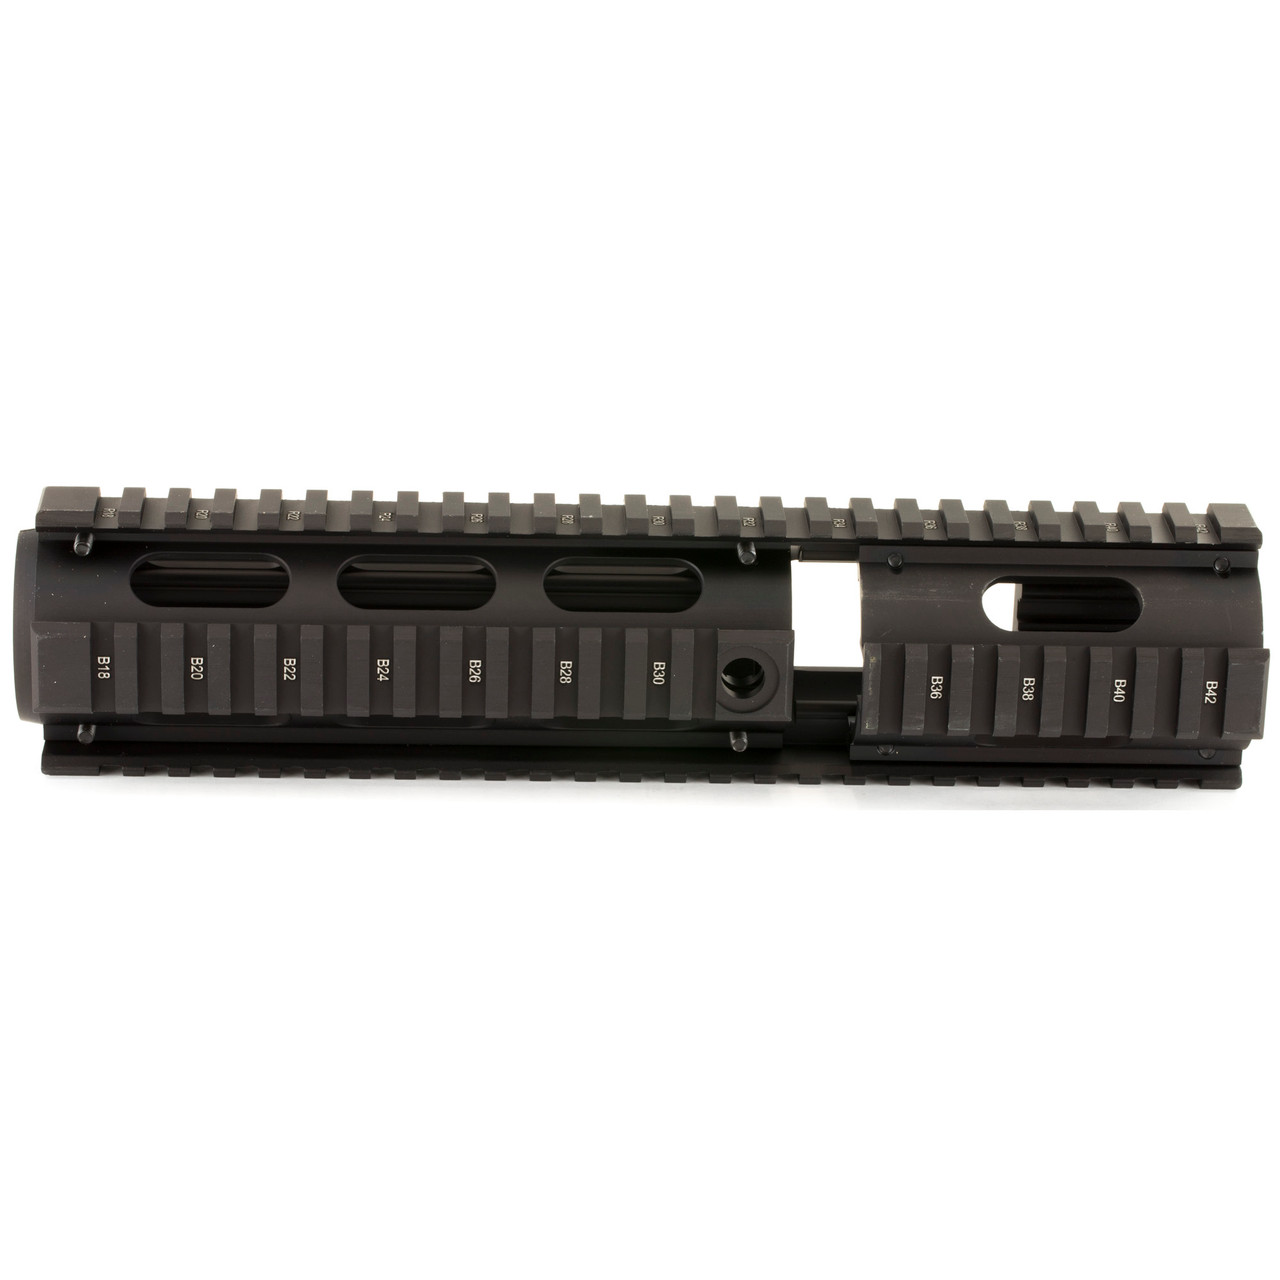 Leapers, Inc. - UTG, Model 4/15 Quad Rail, Fits AR Rifles, Carbine Length, with Front Extension, Black